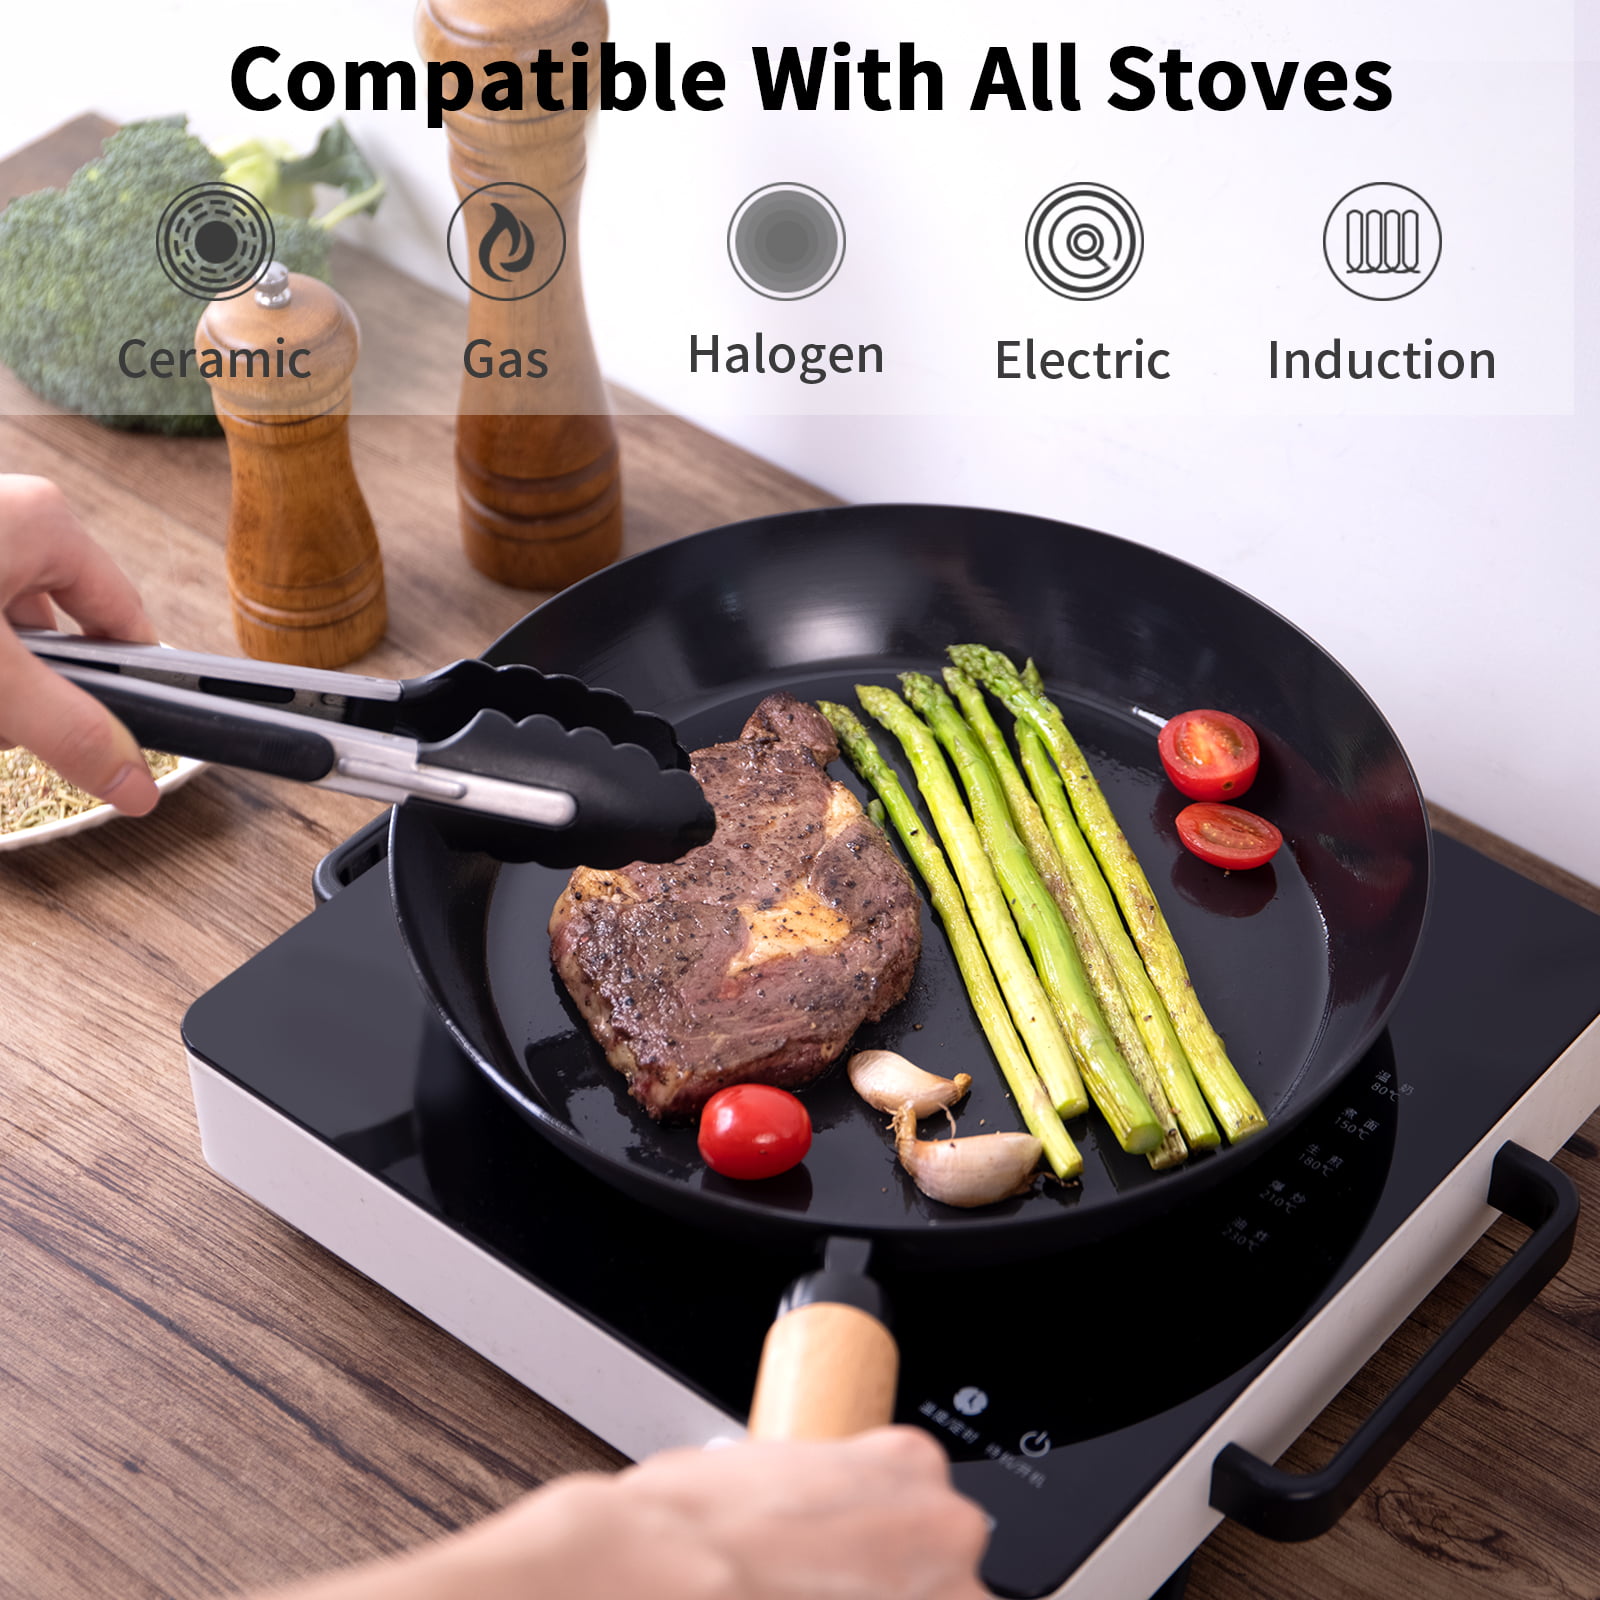 KIR Equipment Frying Pan Nonstick Skillet 10.5: Carbon Steel Cookware Fry  Pan without PFAs, Toxin Free & Healthy Alternative for Stove or Oven -  Yahoo Shopping